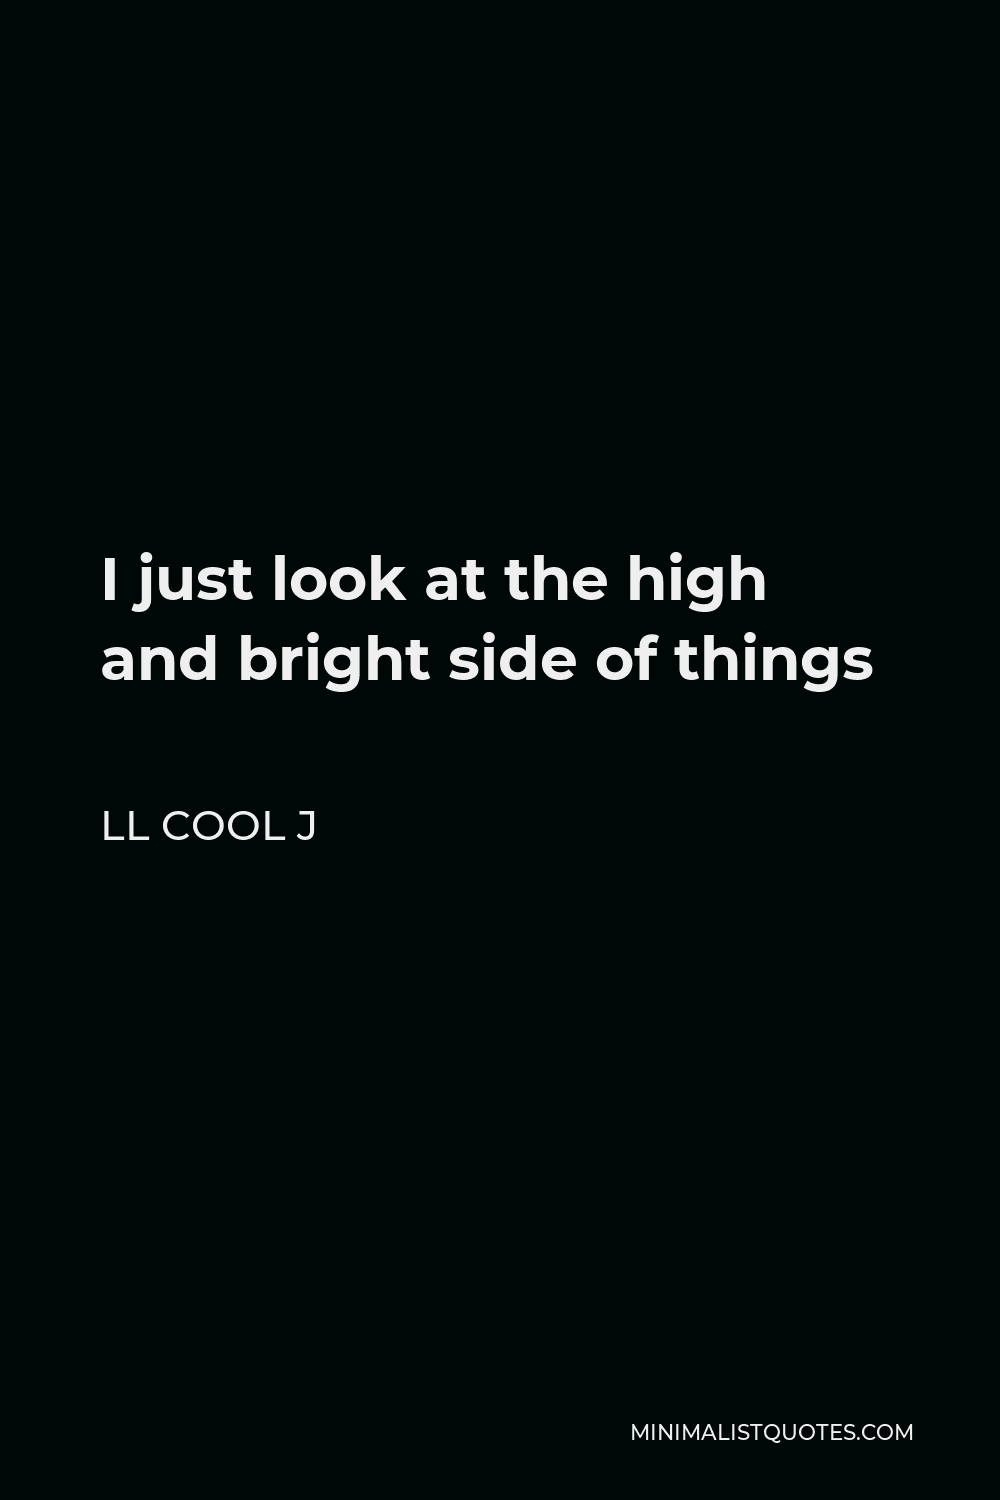 LL Cool J Quote - I just look at the high and bright side of things